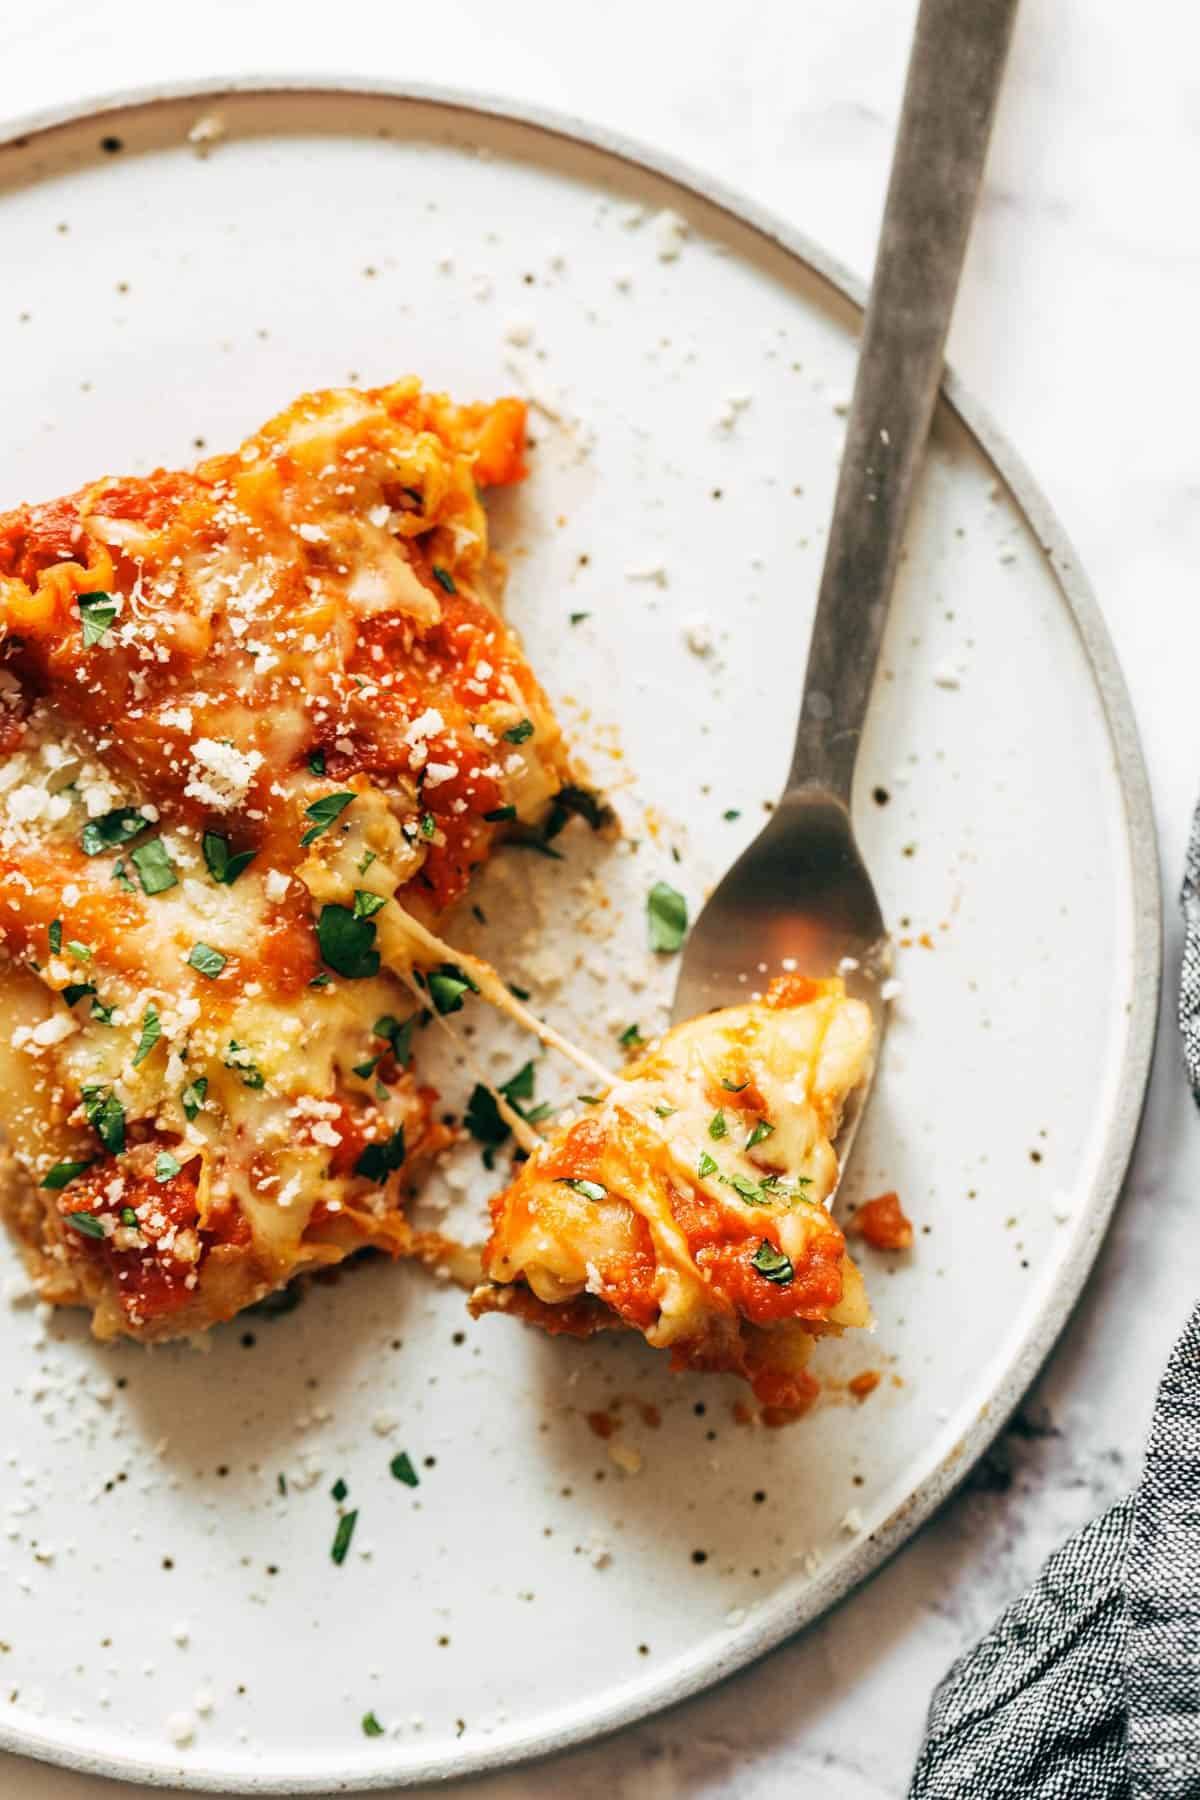 Lasagna florentine with a bite on a plate.